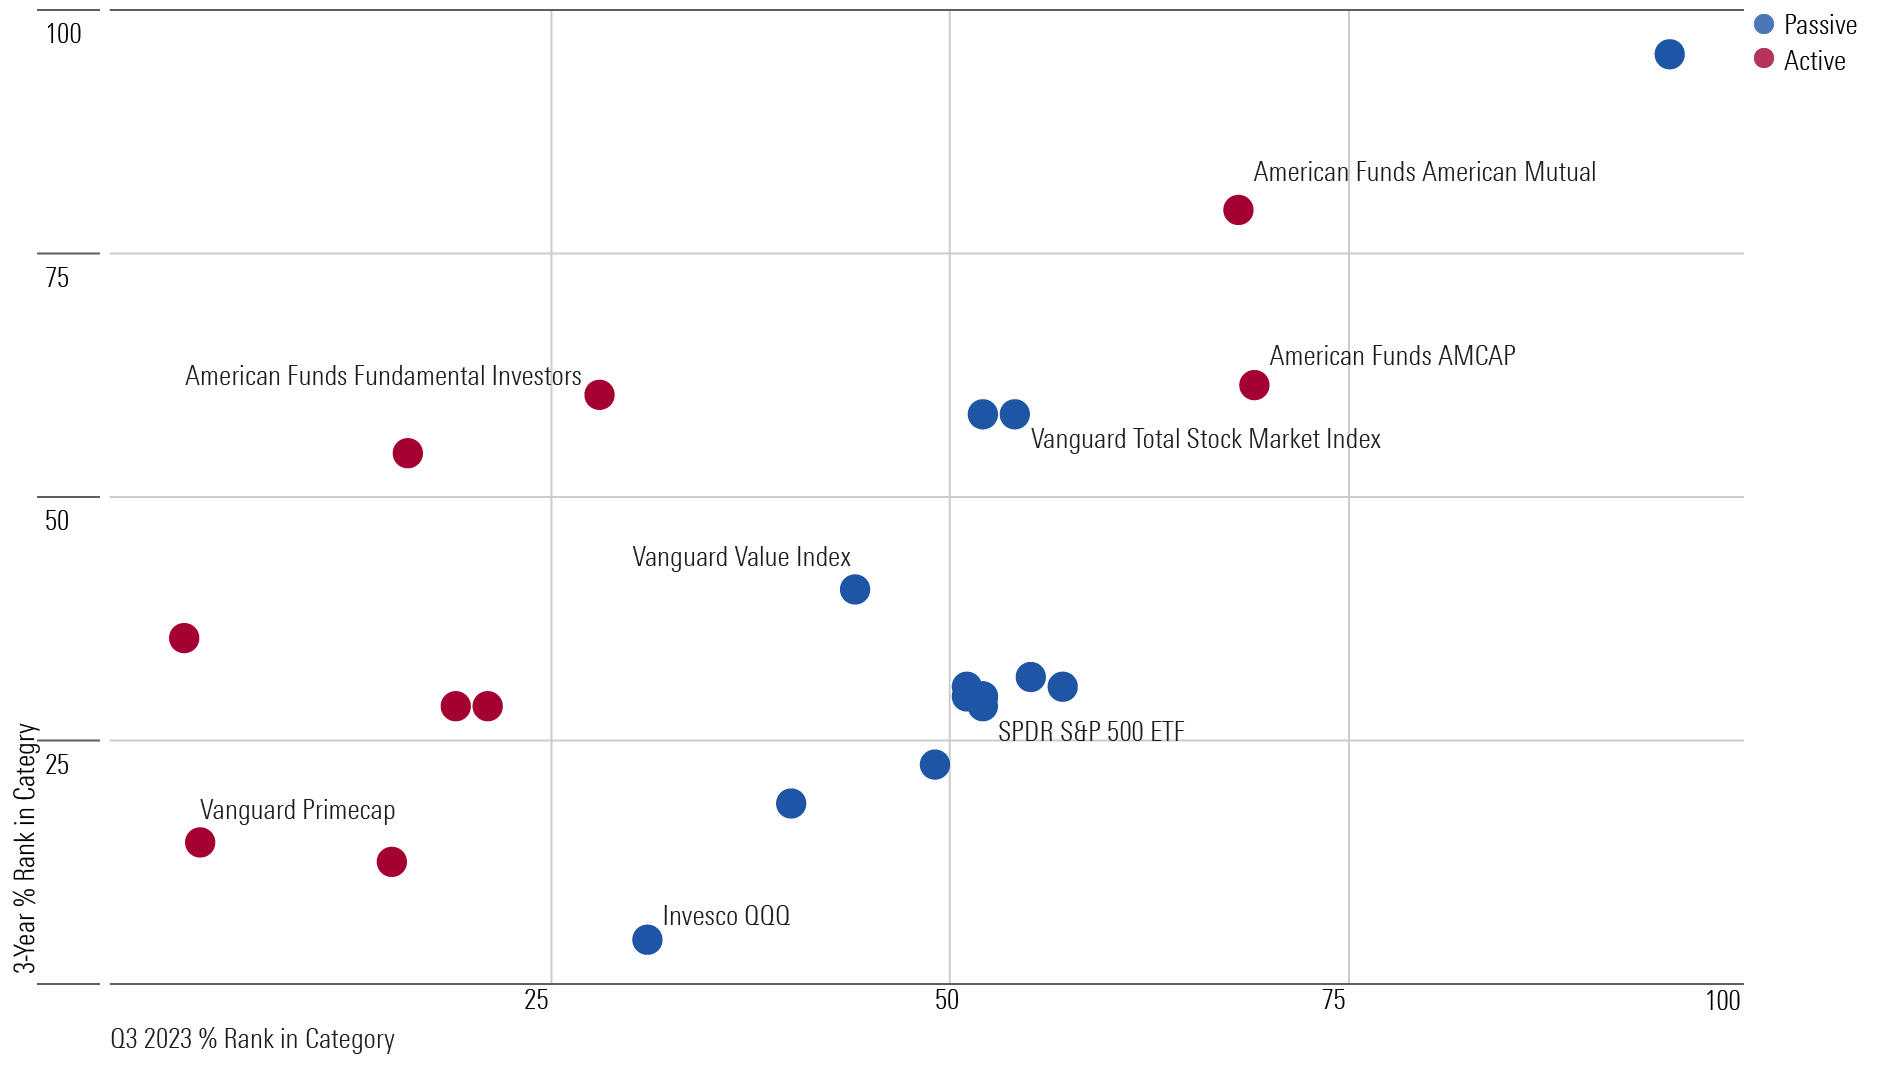 scatter plot showing the Q3 vs. 3-year ranks of equity funds